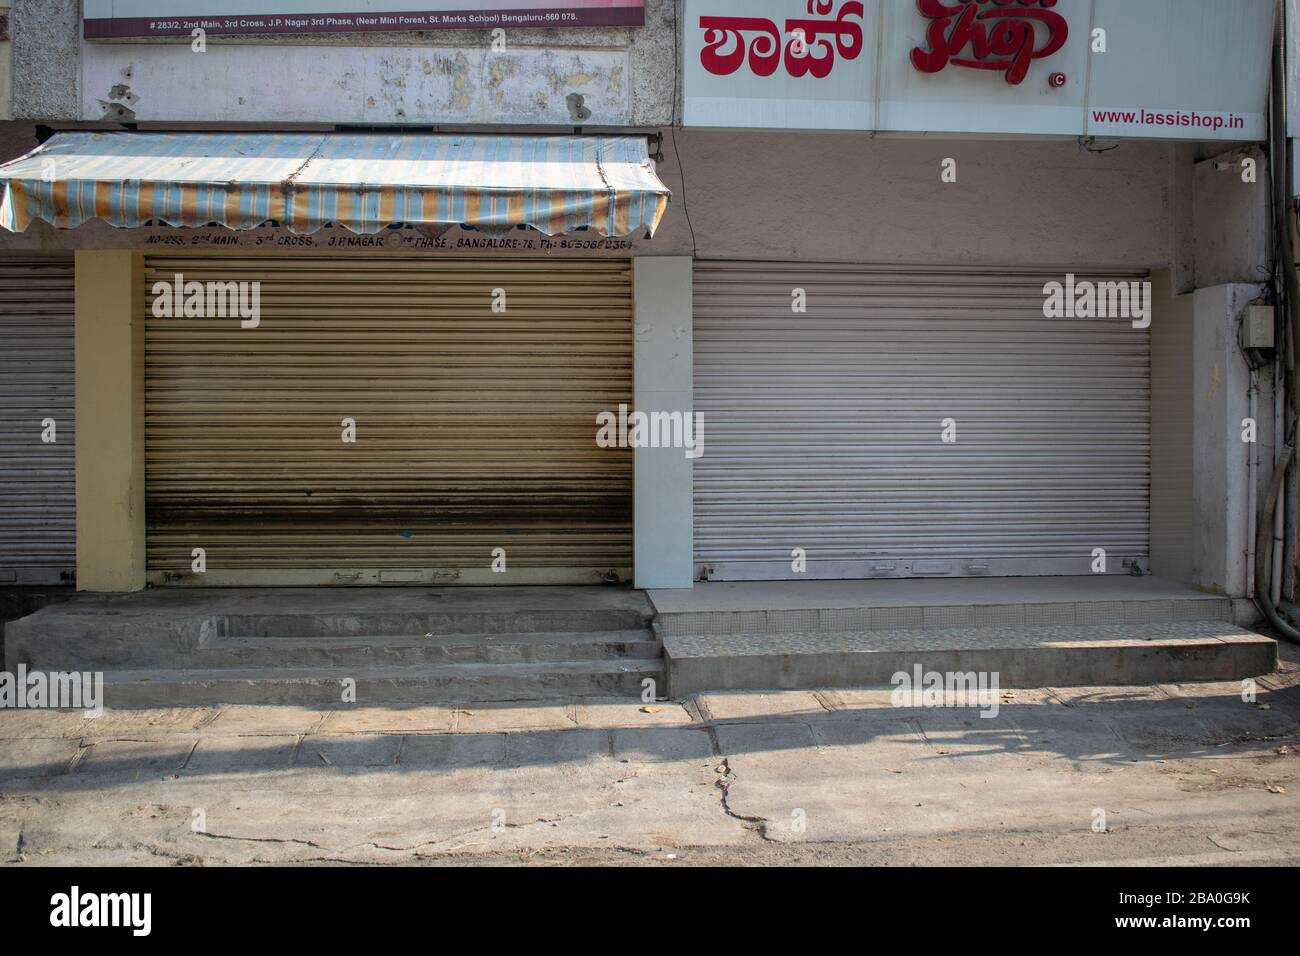 Closed shops during covid 19 lockdown in bengaluru Stock Photo